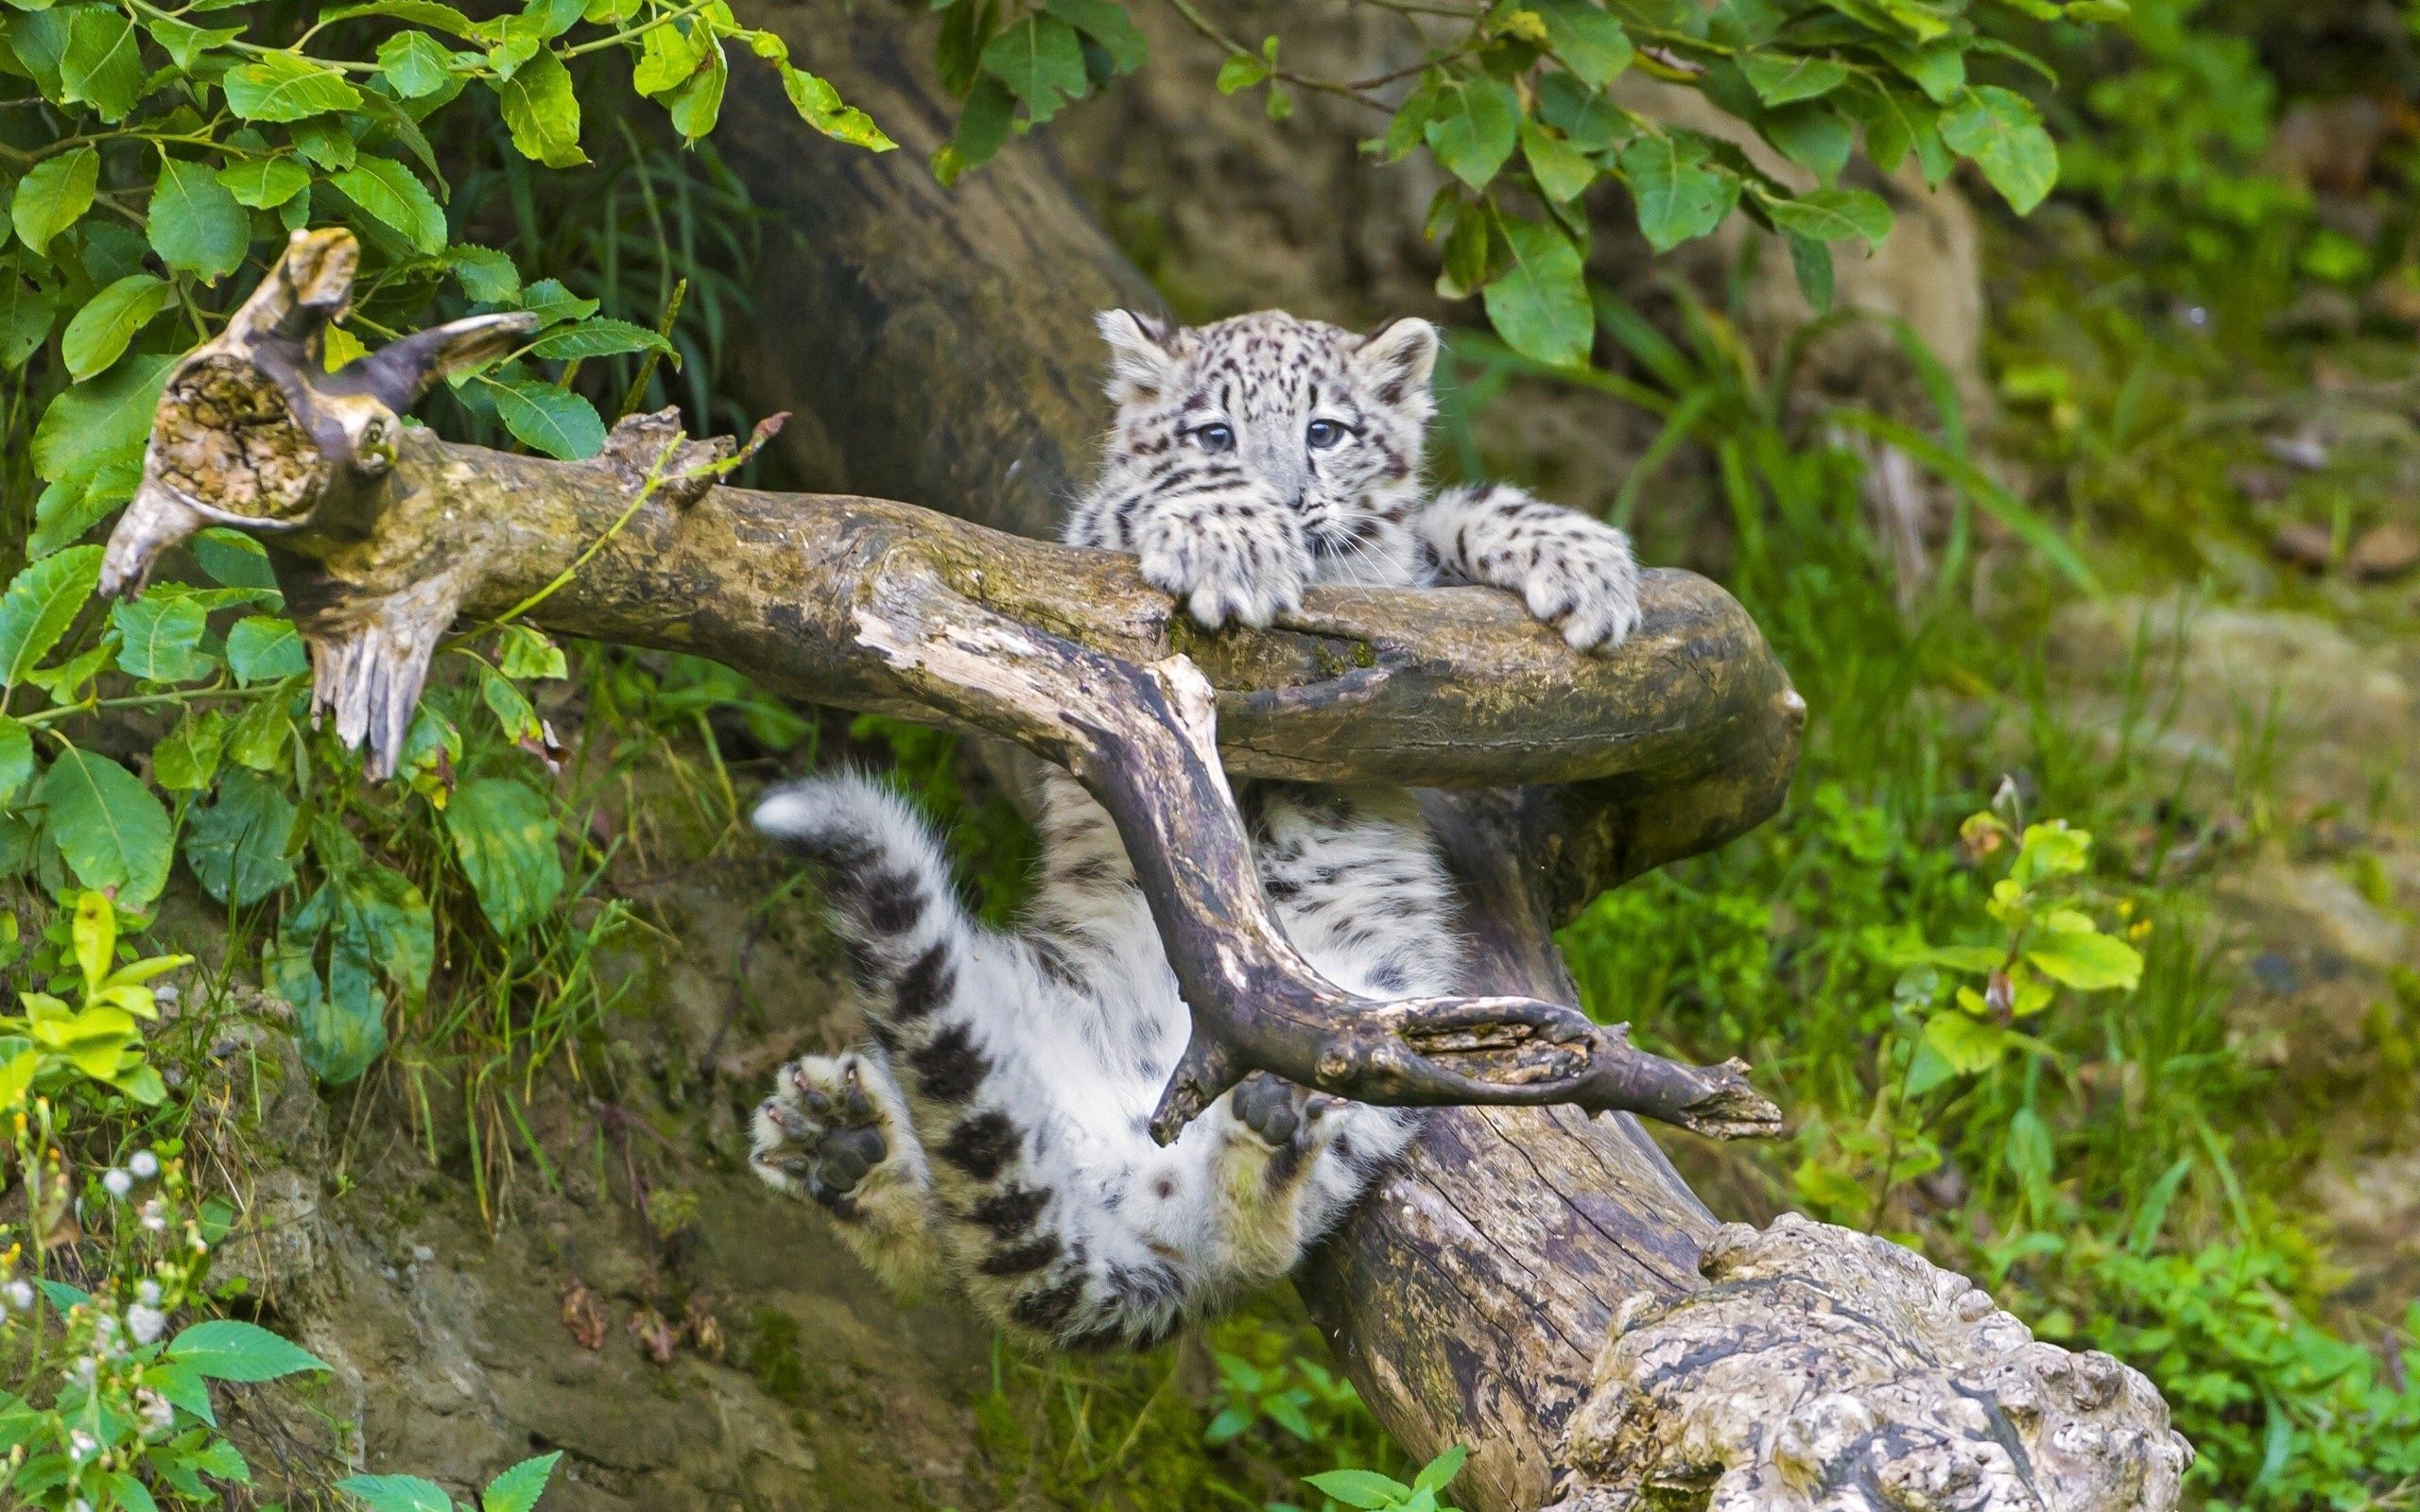 92770 download wallpaper snow leopard, animals, wood, young, tree, branch, joey screensavers and pictures for free